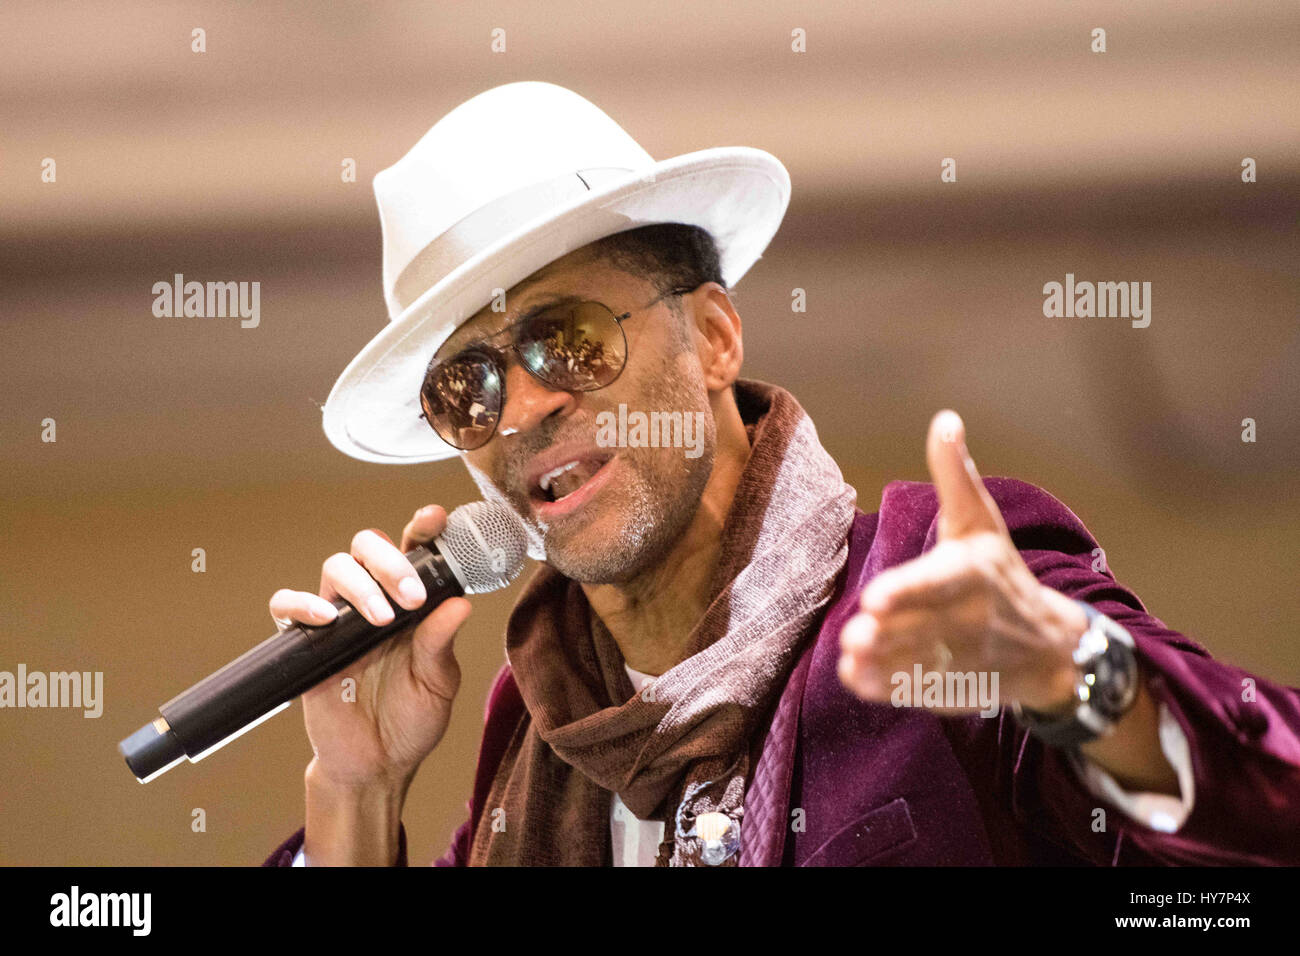 Philadelphia, Pennsylvania, USA. 1st Apr, 2017. Grammy nominated R&B singer, actor and song writer, ERIC BENET, performs at the WDAS Women of Excellence Award Luncheon held at the Sheraton Hotel in Philadelphia Pa It's theÂ 3rd Annual WDAS Women of Excellence Luncheon presentedÂ by Gwynedd Mercy University. Credit: Ricky Fitchett/ZUMA Wire/Alamy Live News Stock Photo